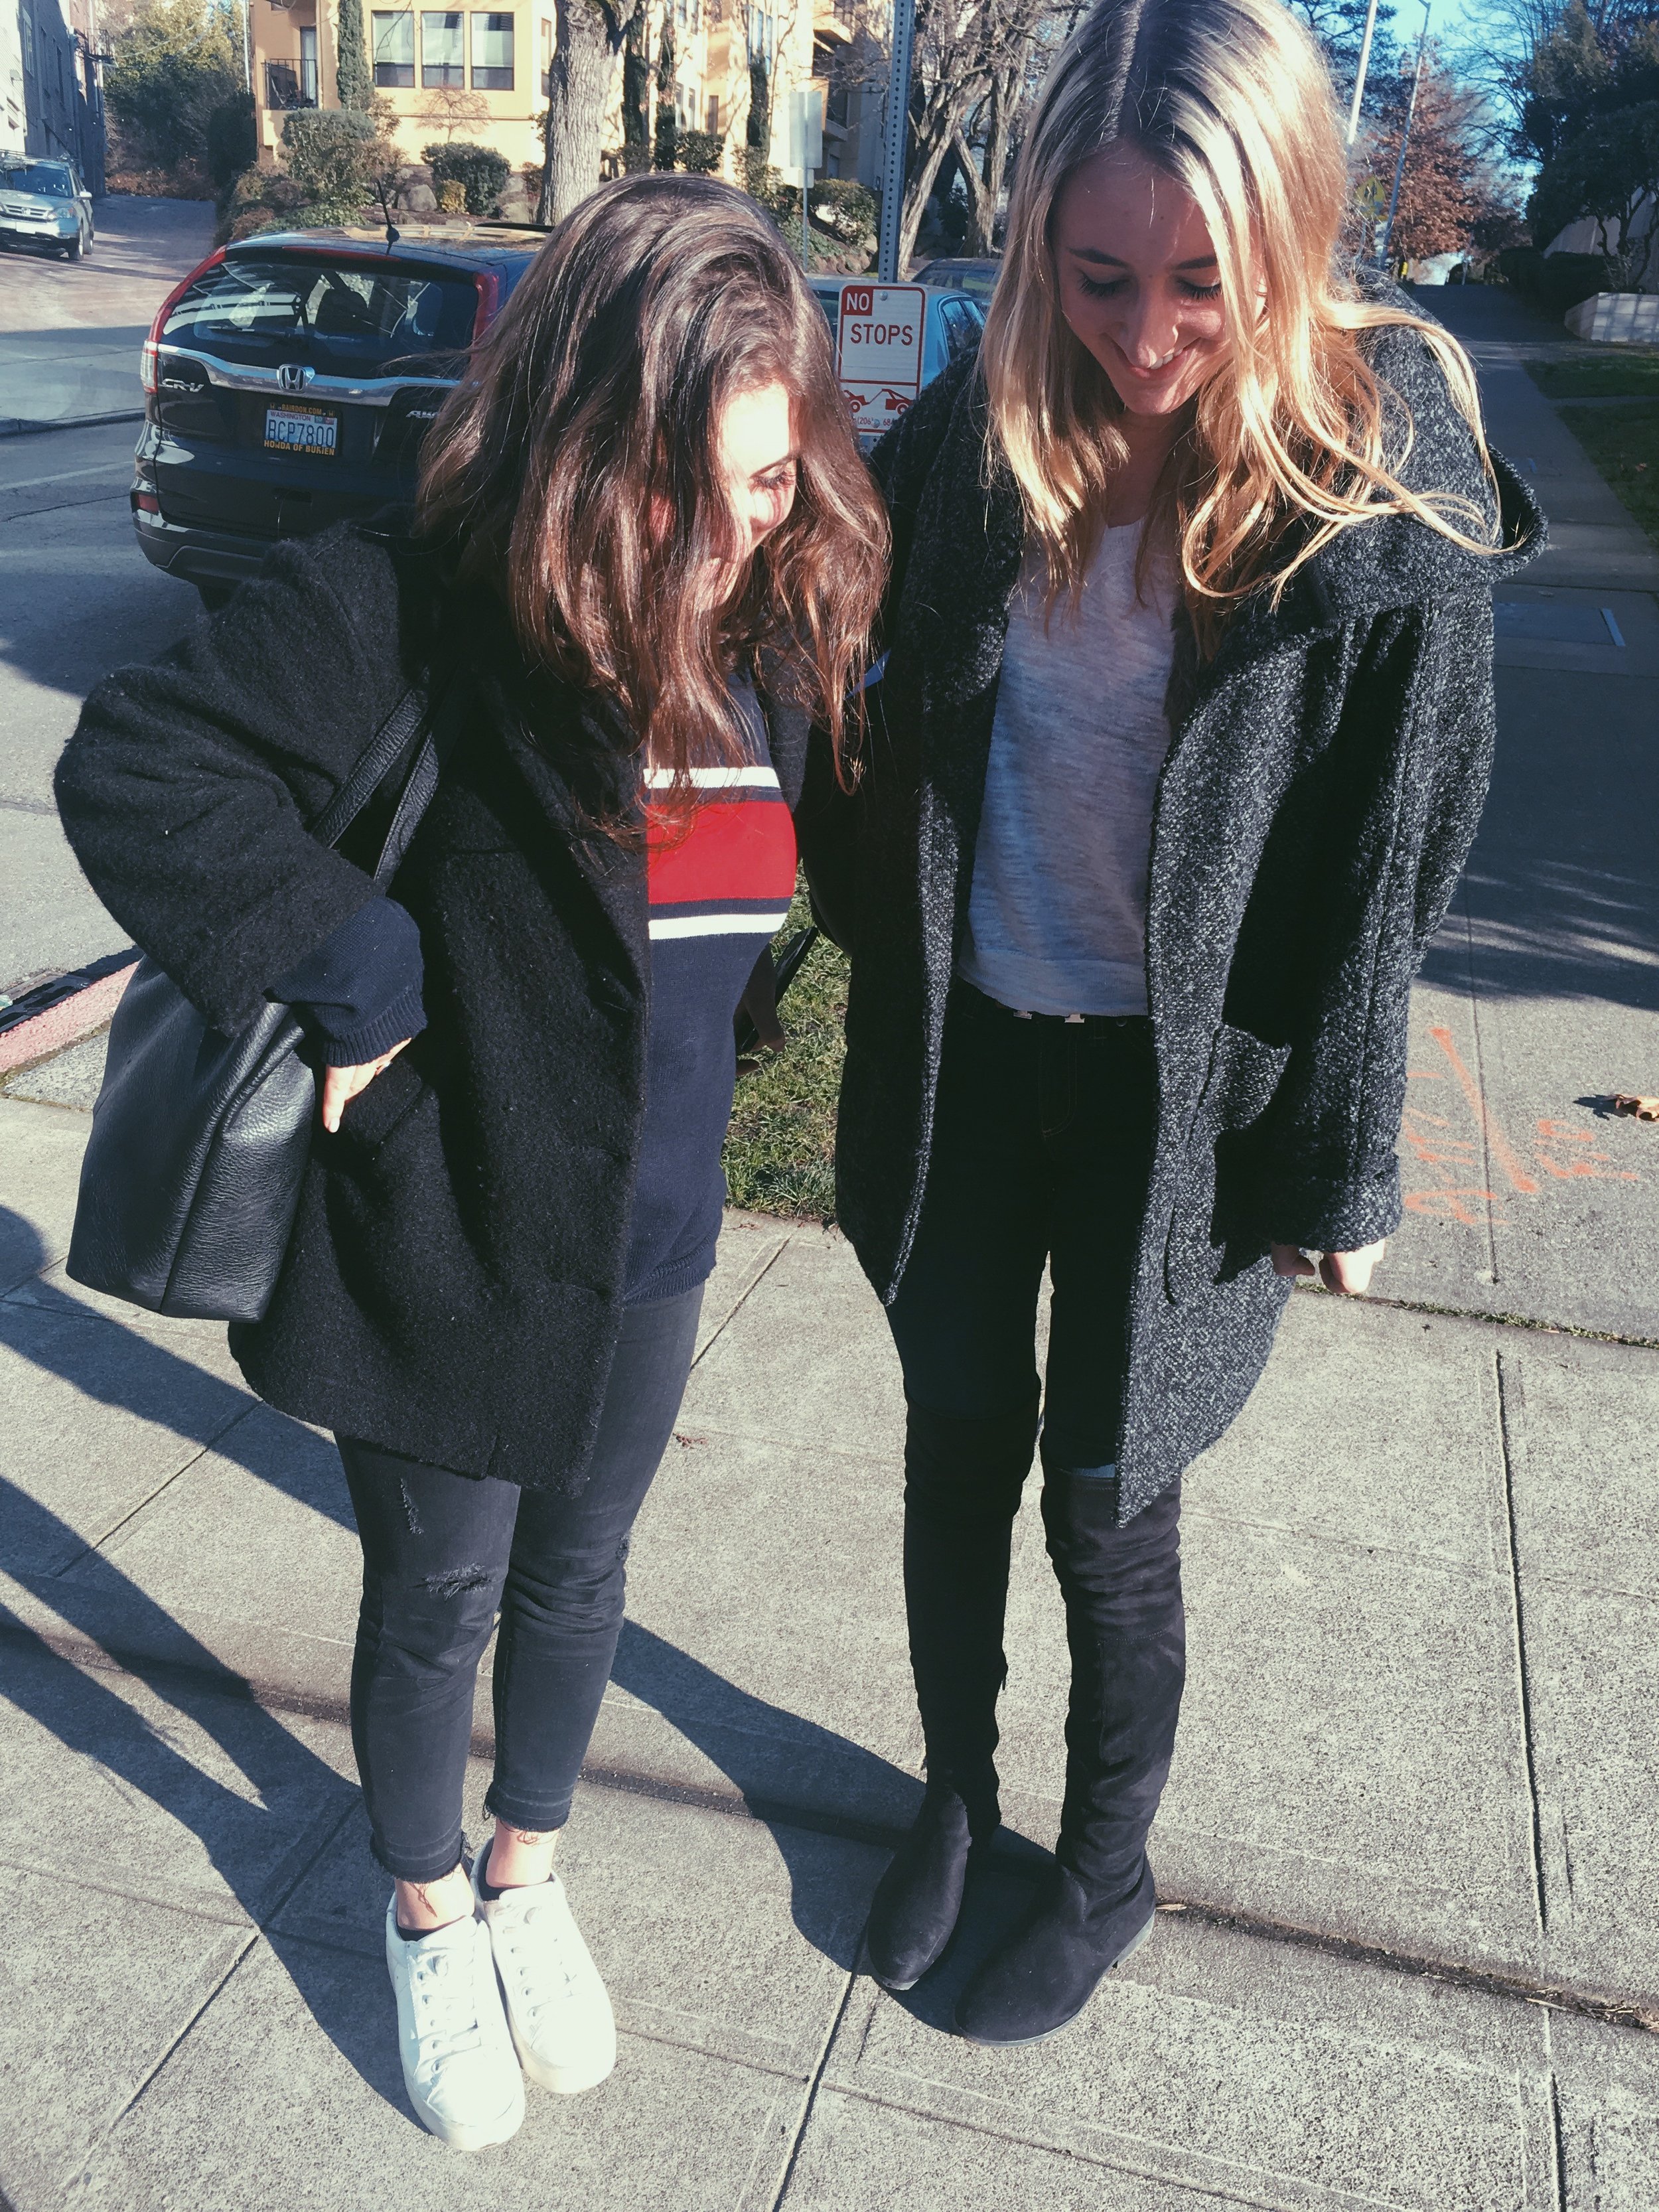   Ruby ‘17 and Camille ‘17:  This duo proves that layering is key. Ruby goes with a sporty approach in an American Apparel coat, Brandy Melville sweater, Zara jeans and Steve Madden sneakers. Camille chooses an Urban Outfitters coat, Nasty Gal boots,